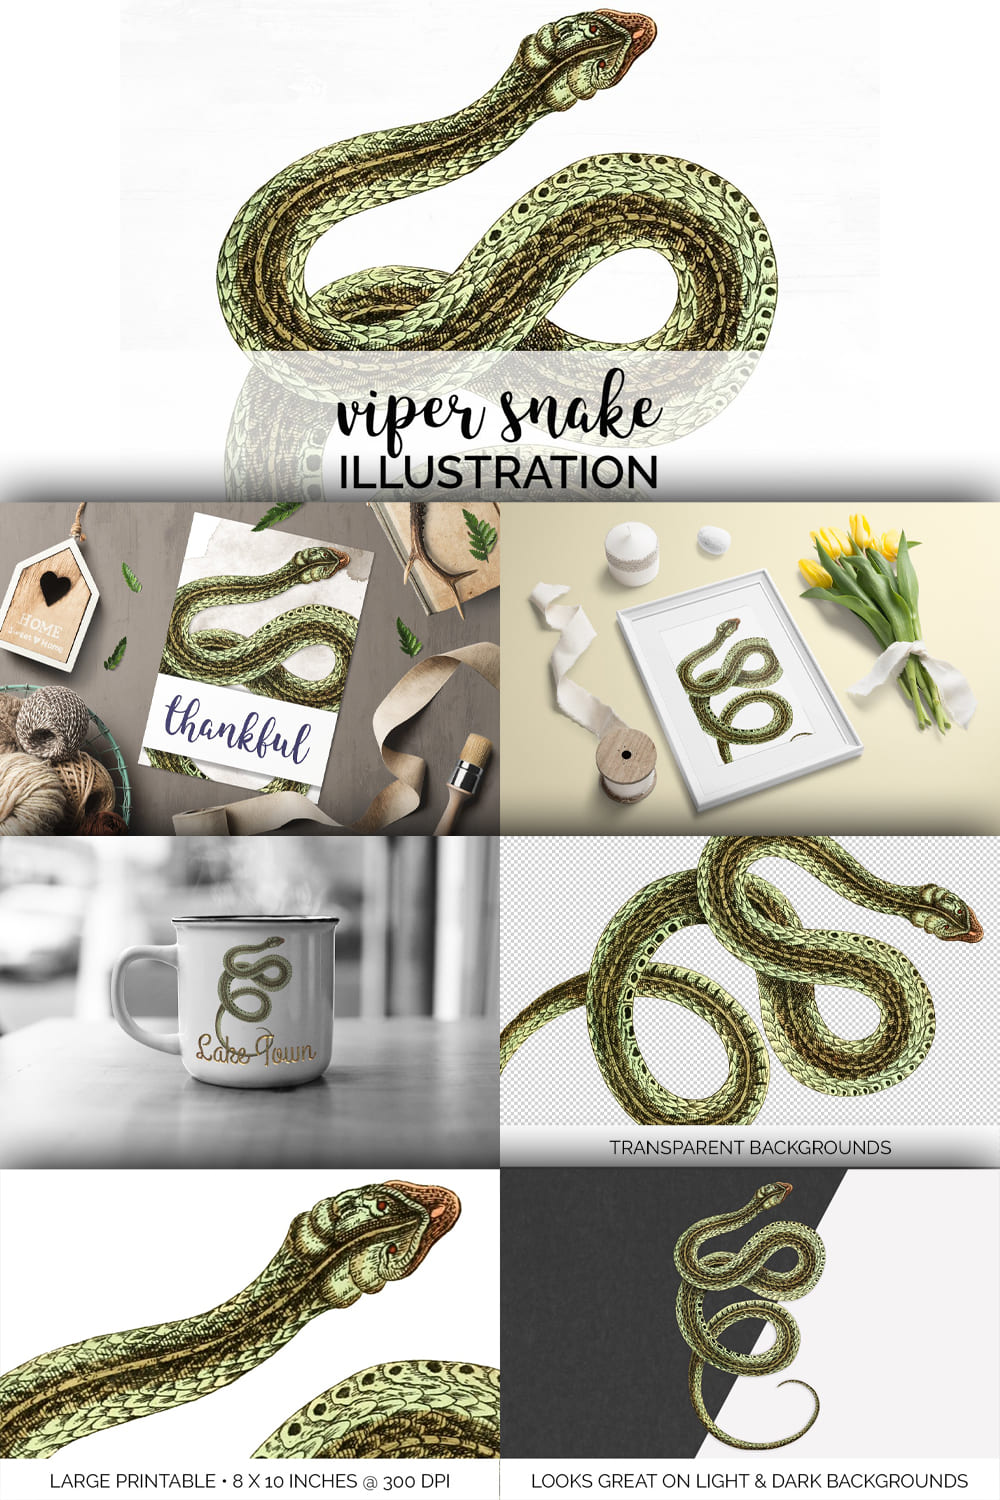 Collection of colorful images viper snake.